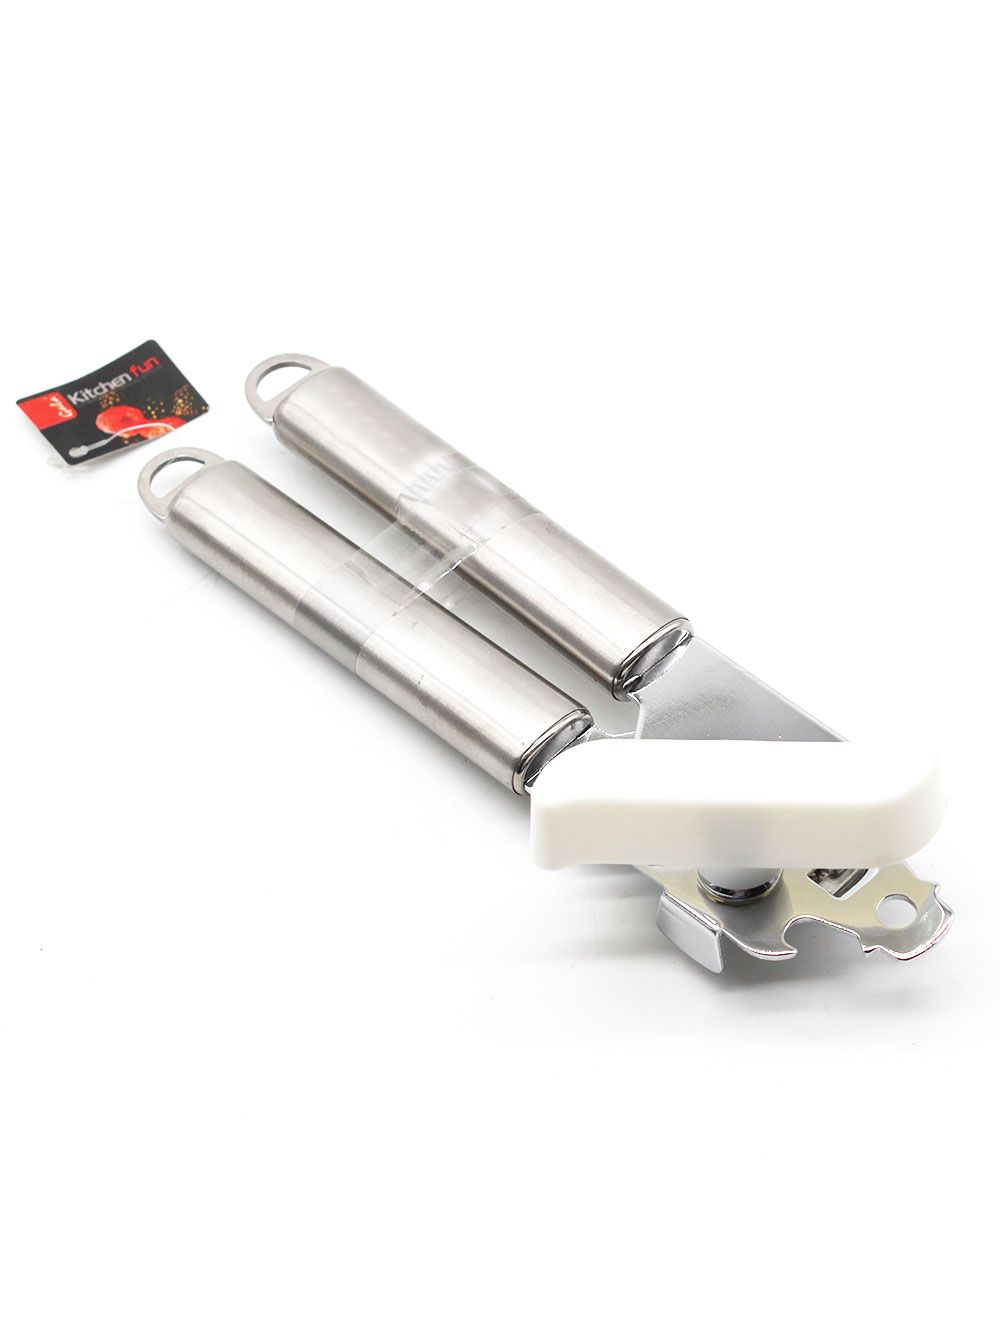 Gala Can Opener in Stainless Steel